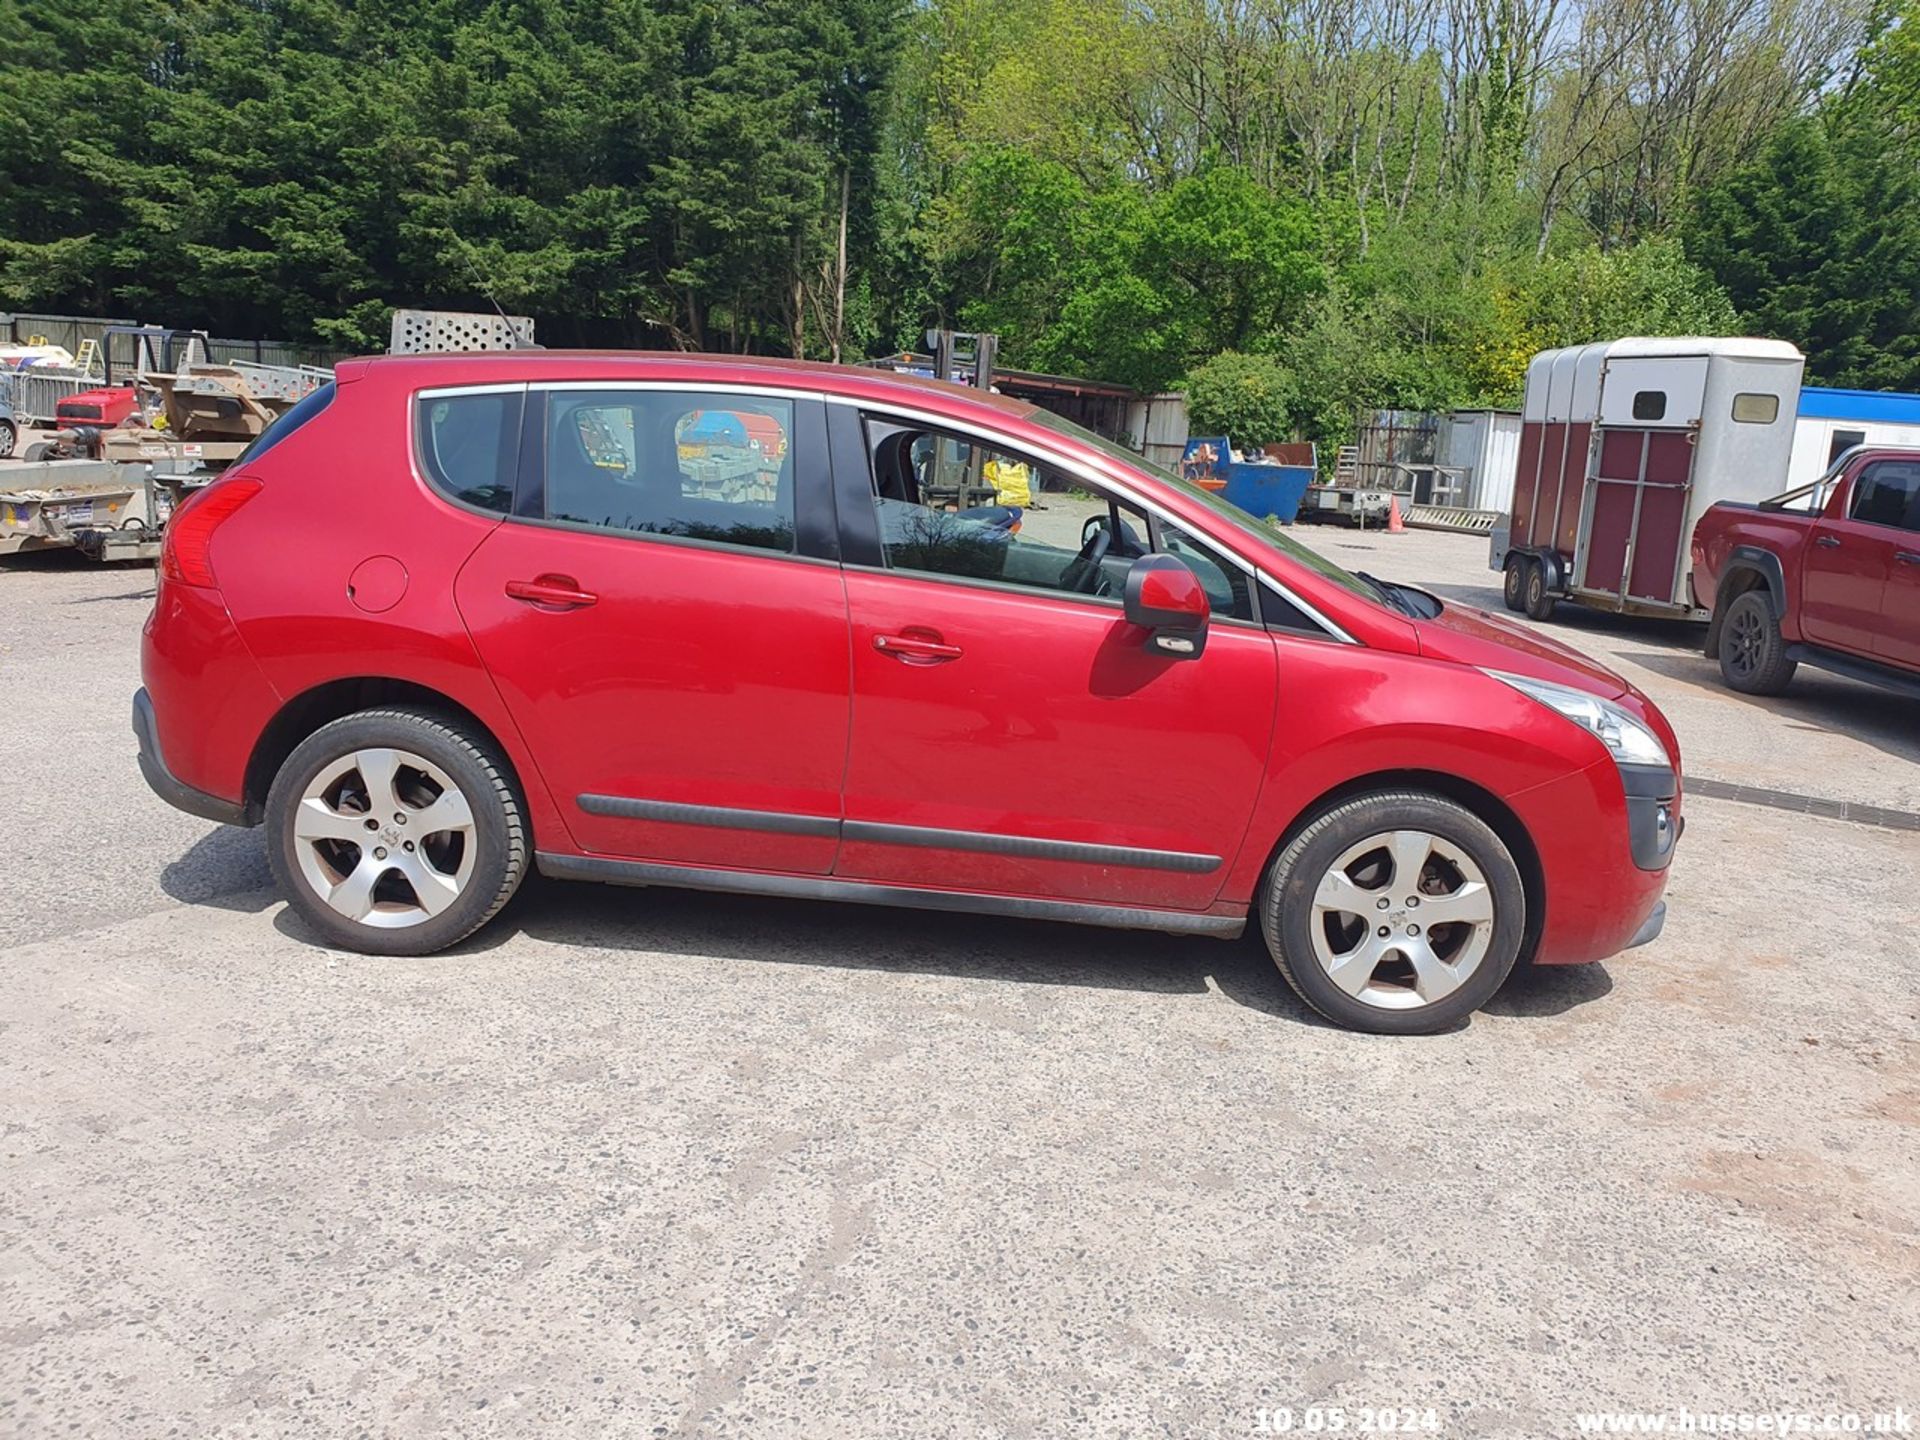 11/61 PEUGEOT 3008 SPORT E-HDI S-A - 1560cc 5dr Hatchback (Red, 89k) - Image 8 of 49